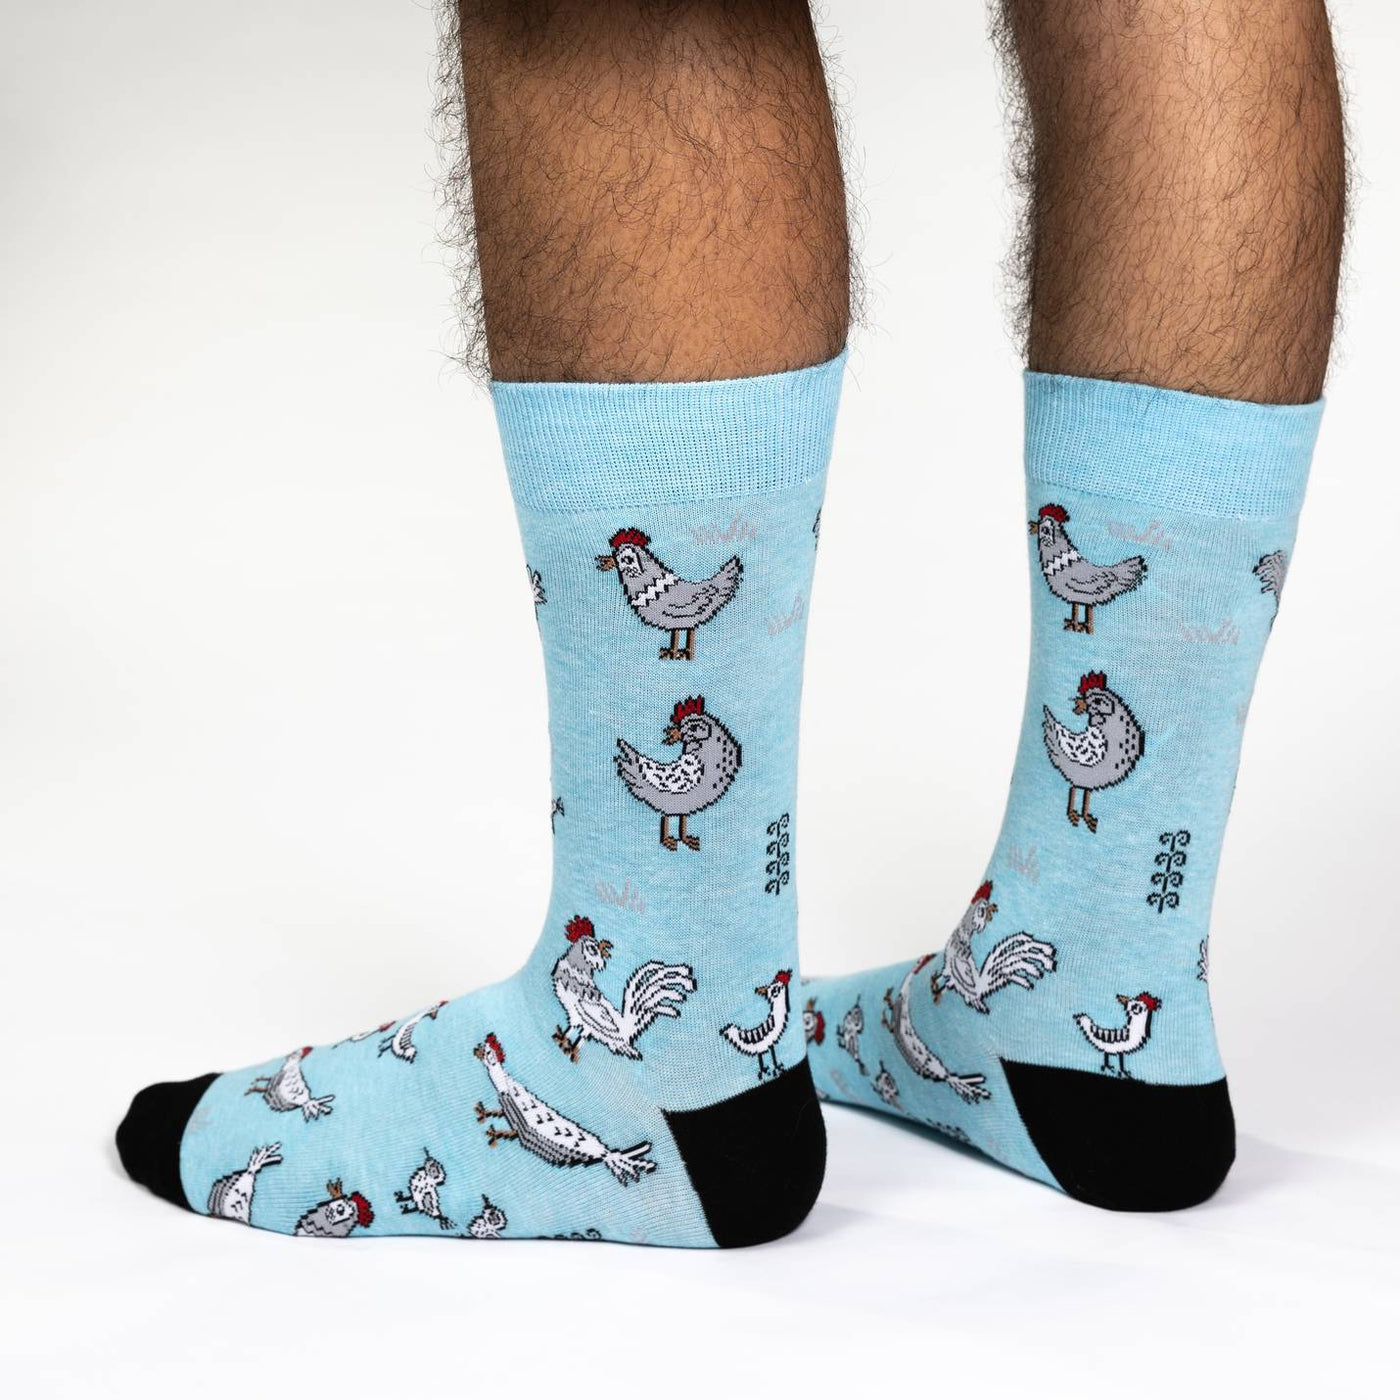 animal socks with chickens